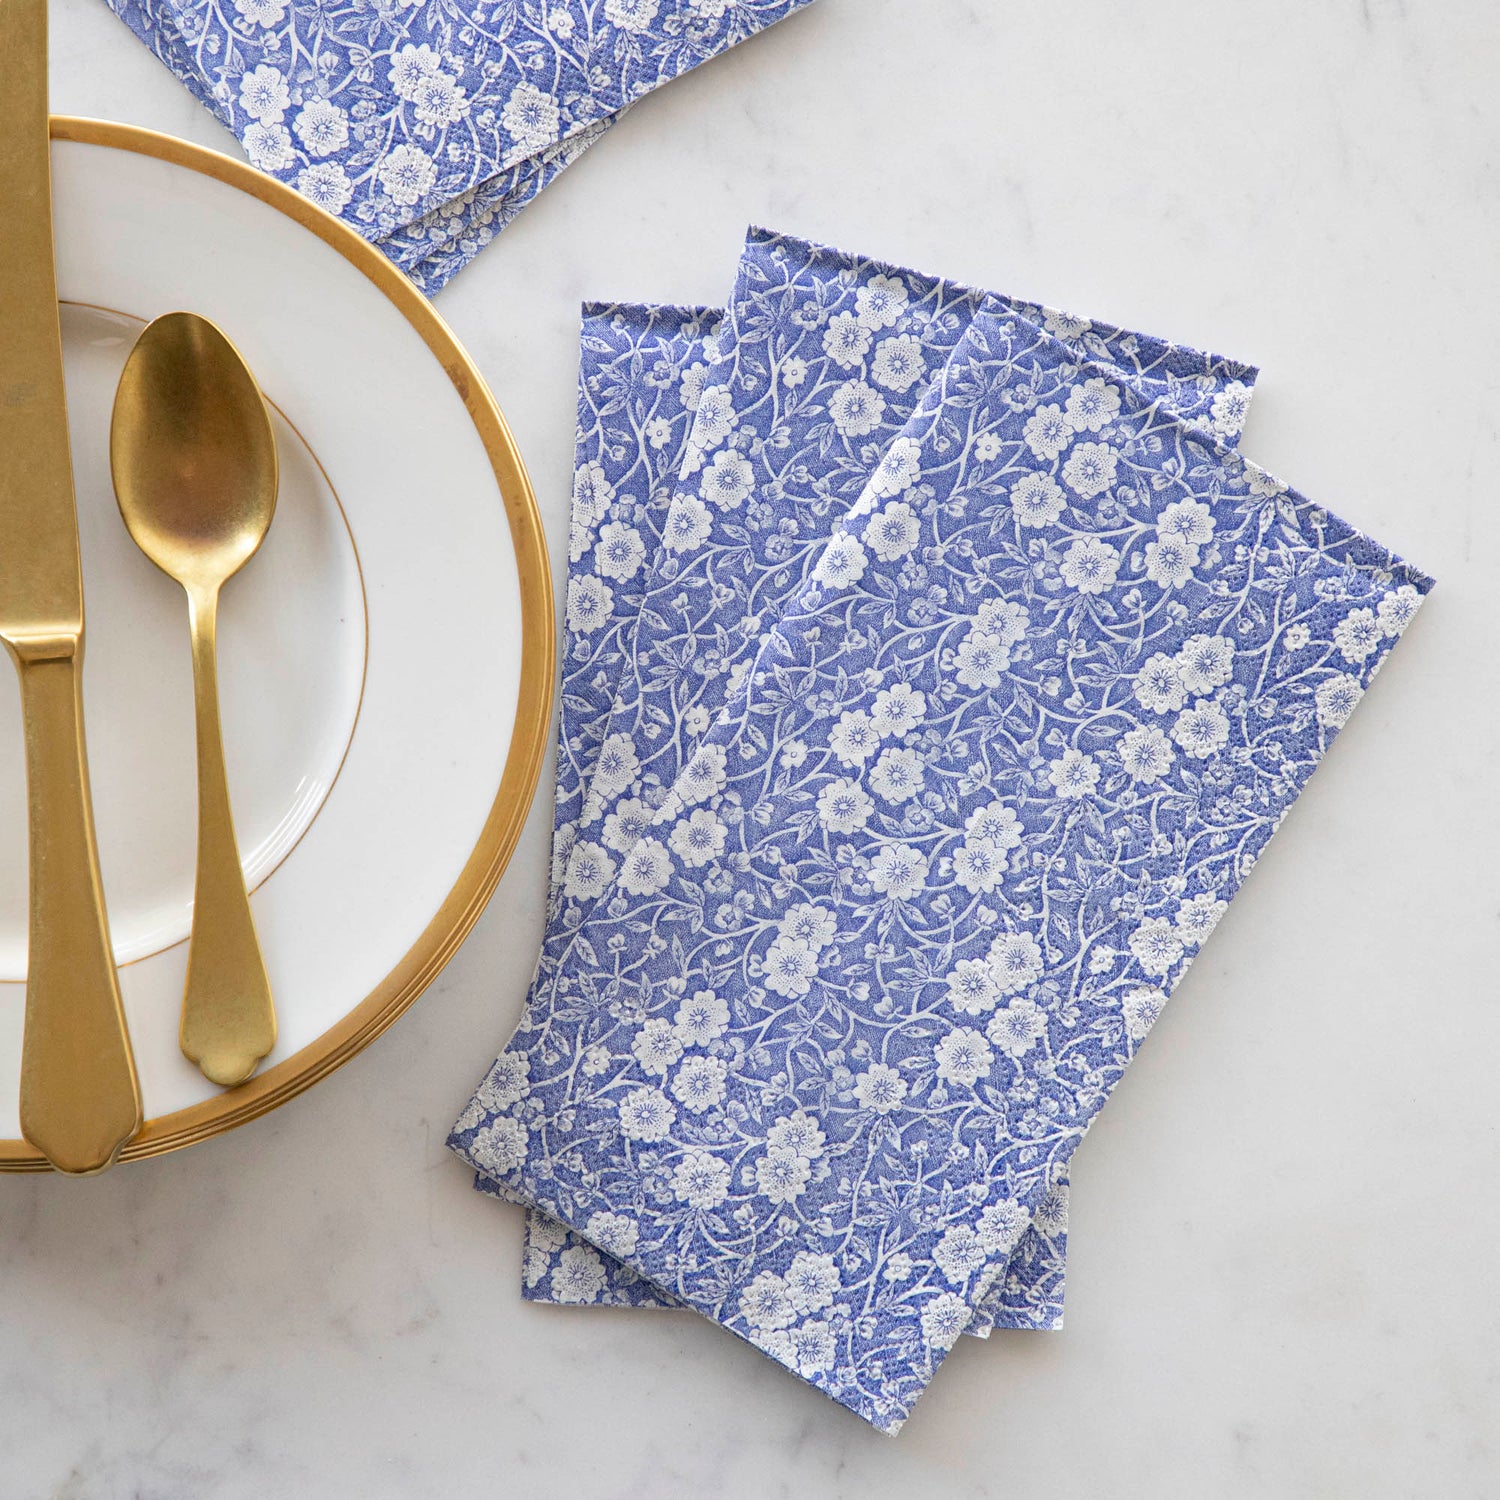 A stack of three Blue Calico Guest Napkins fanned out next to a gold-rimmed plate with gold flatware. 